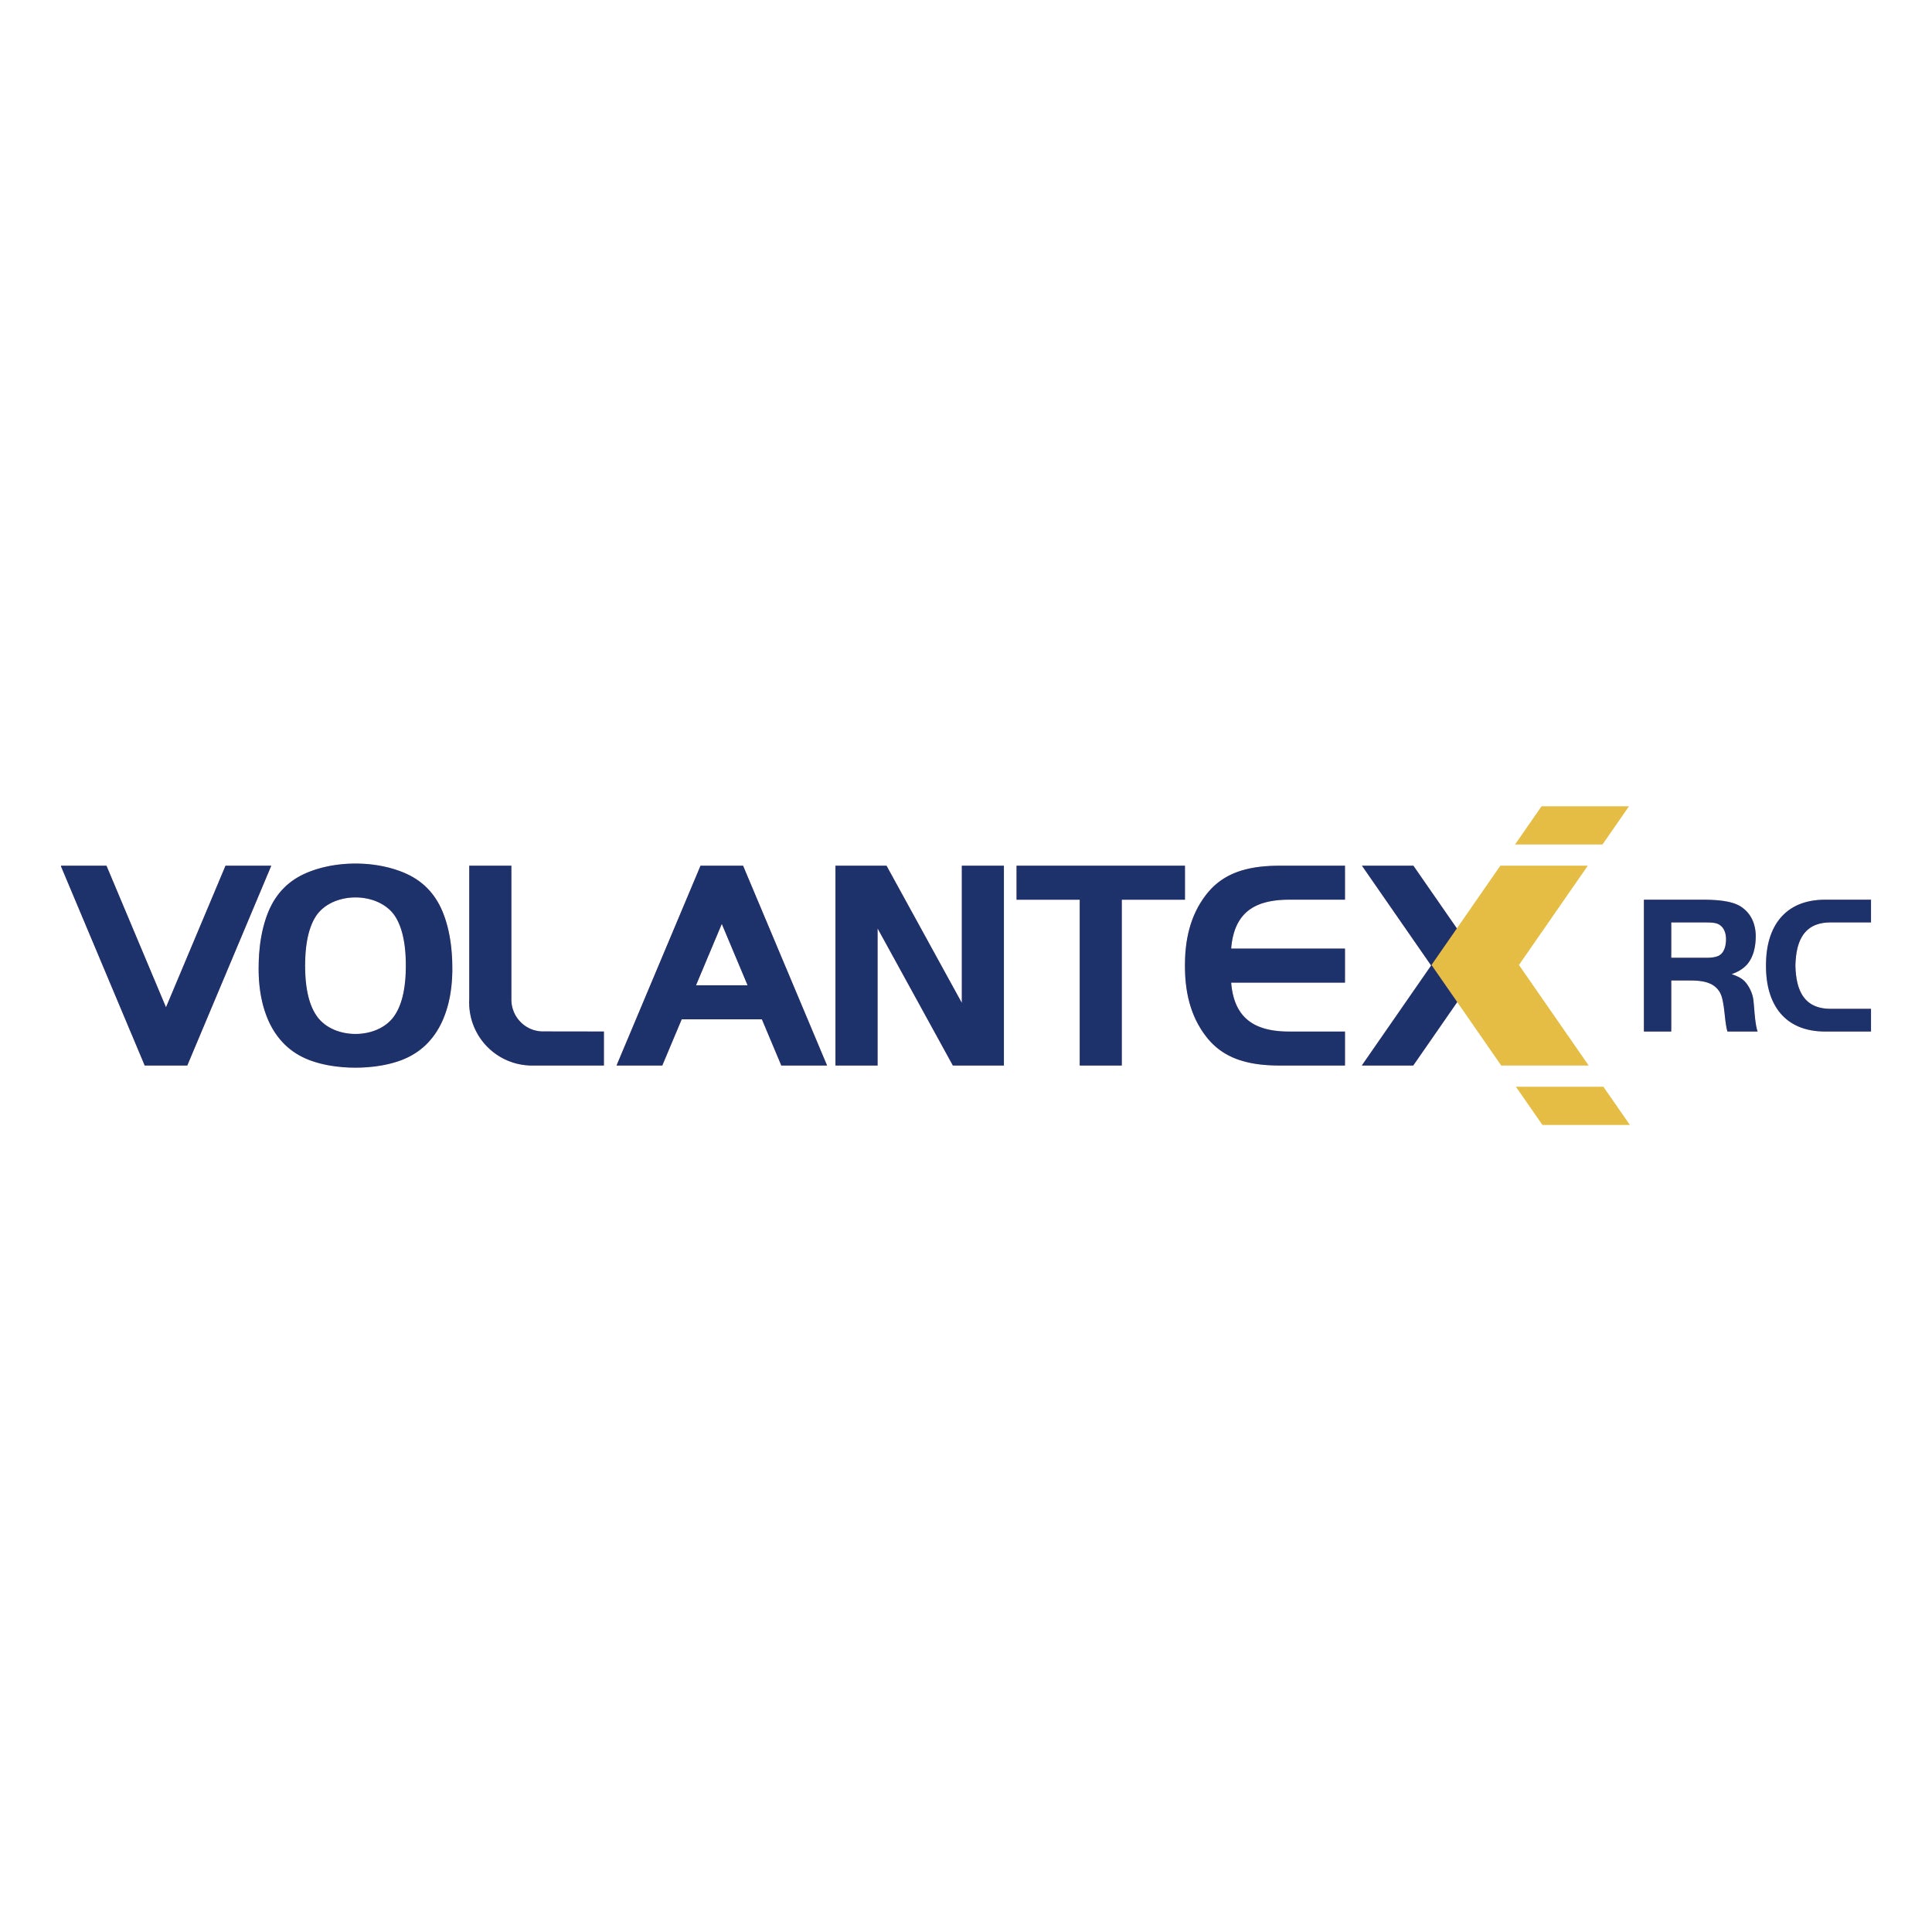 The Ultimate Guide for RC Drone Newbies - Featuring Volantex